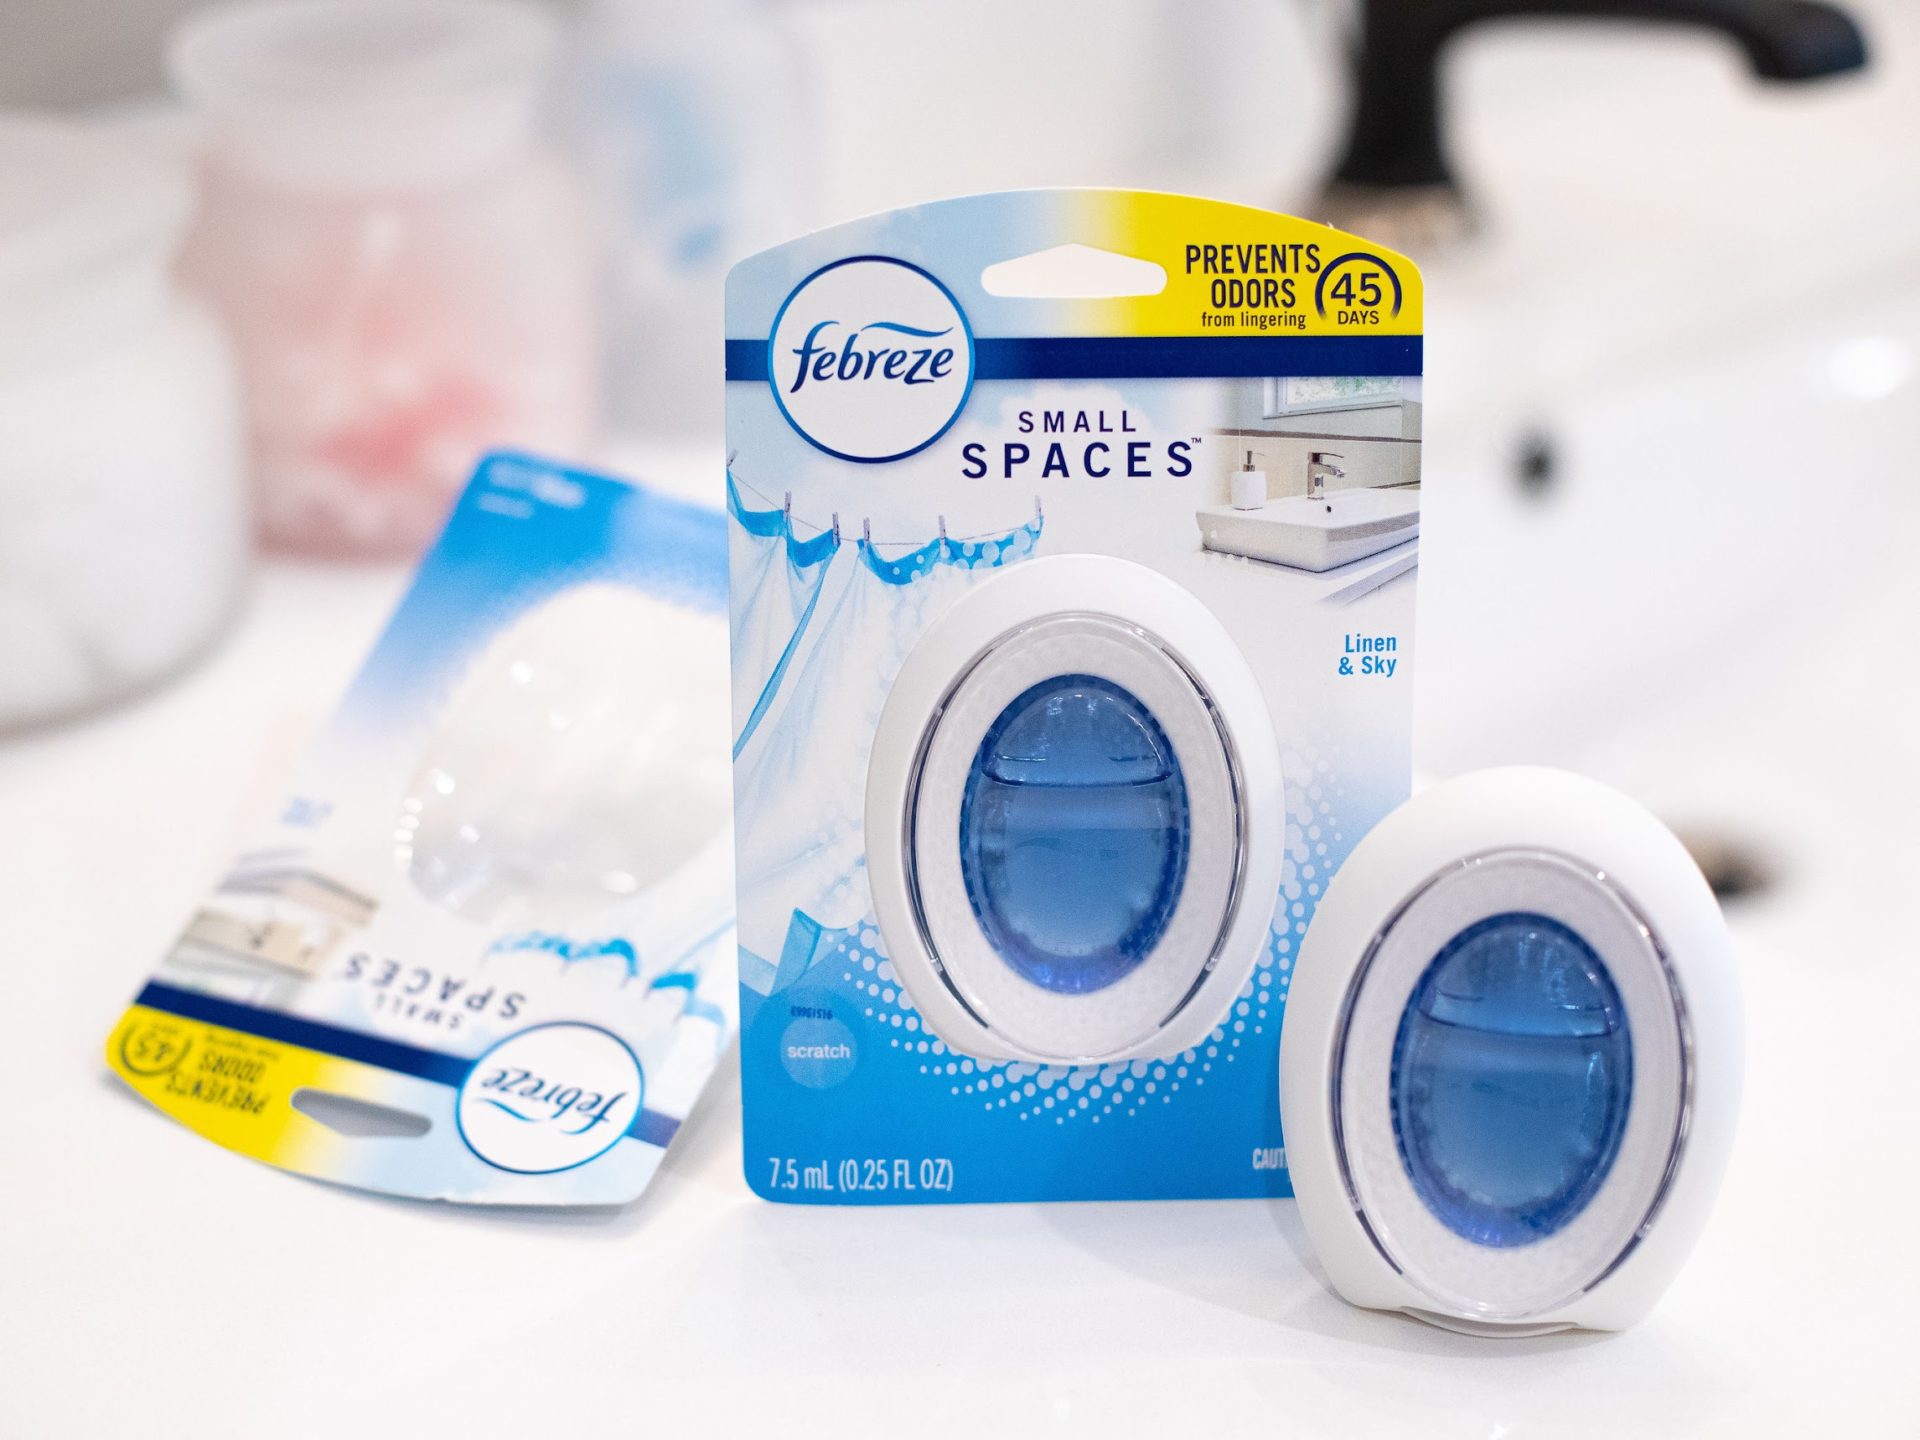 Febreze Small Spaces As Low As $1.50 At Kroger